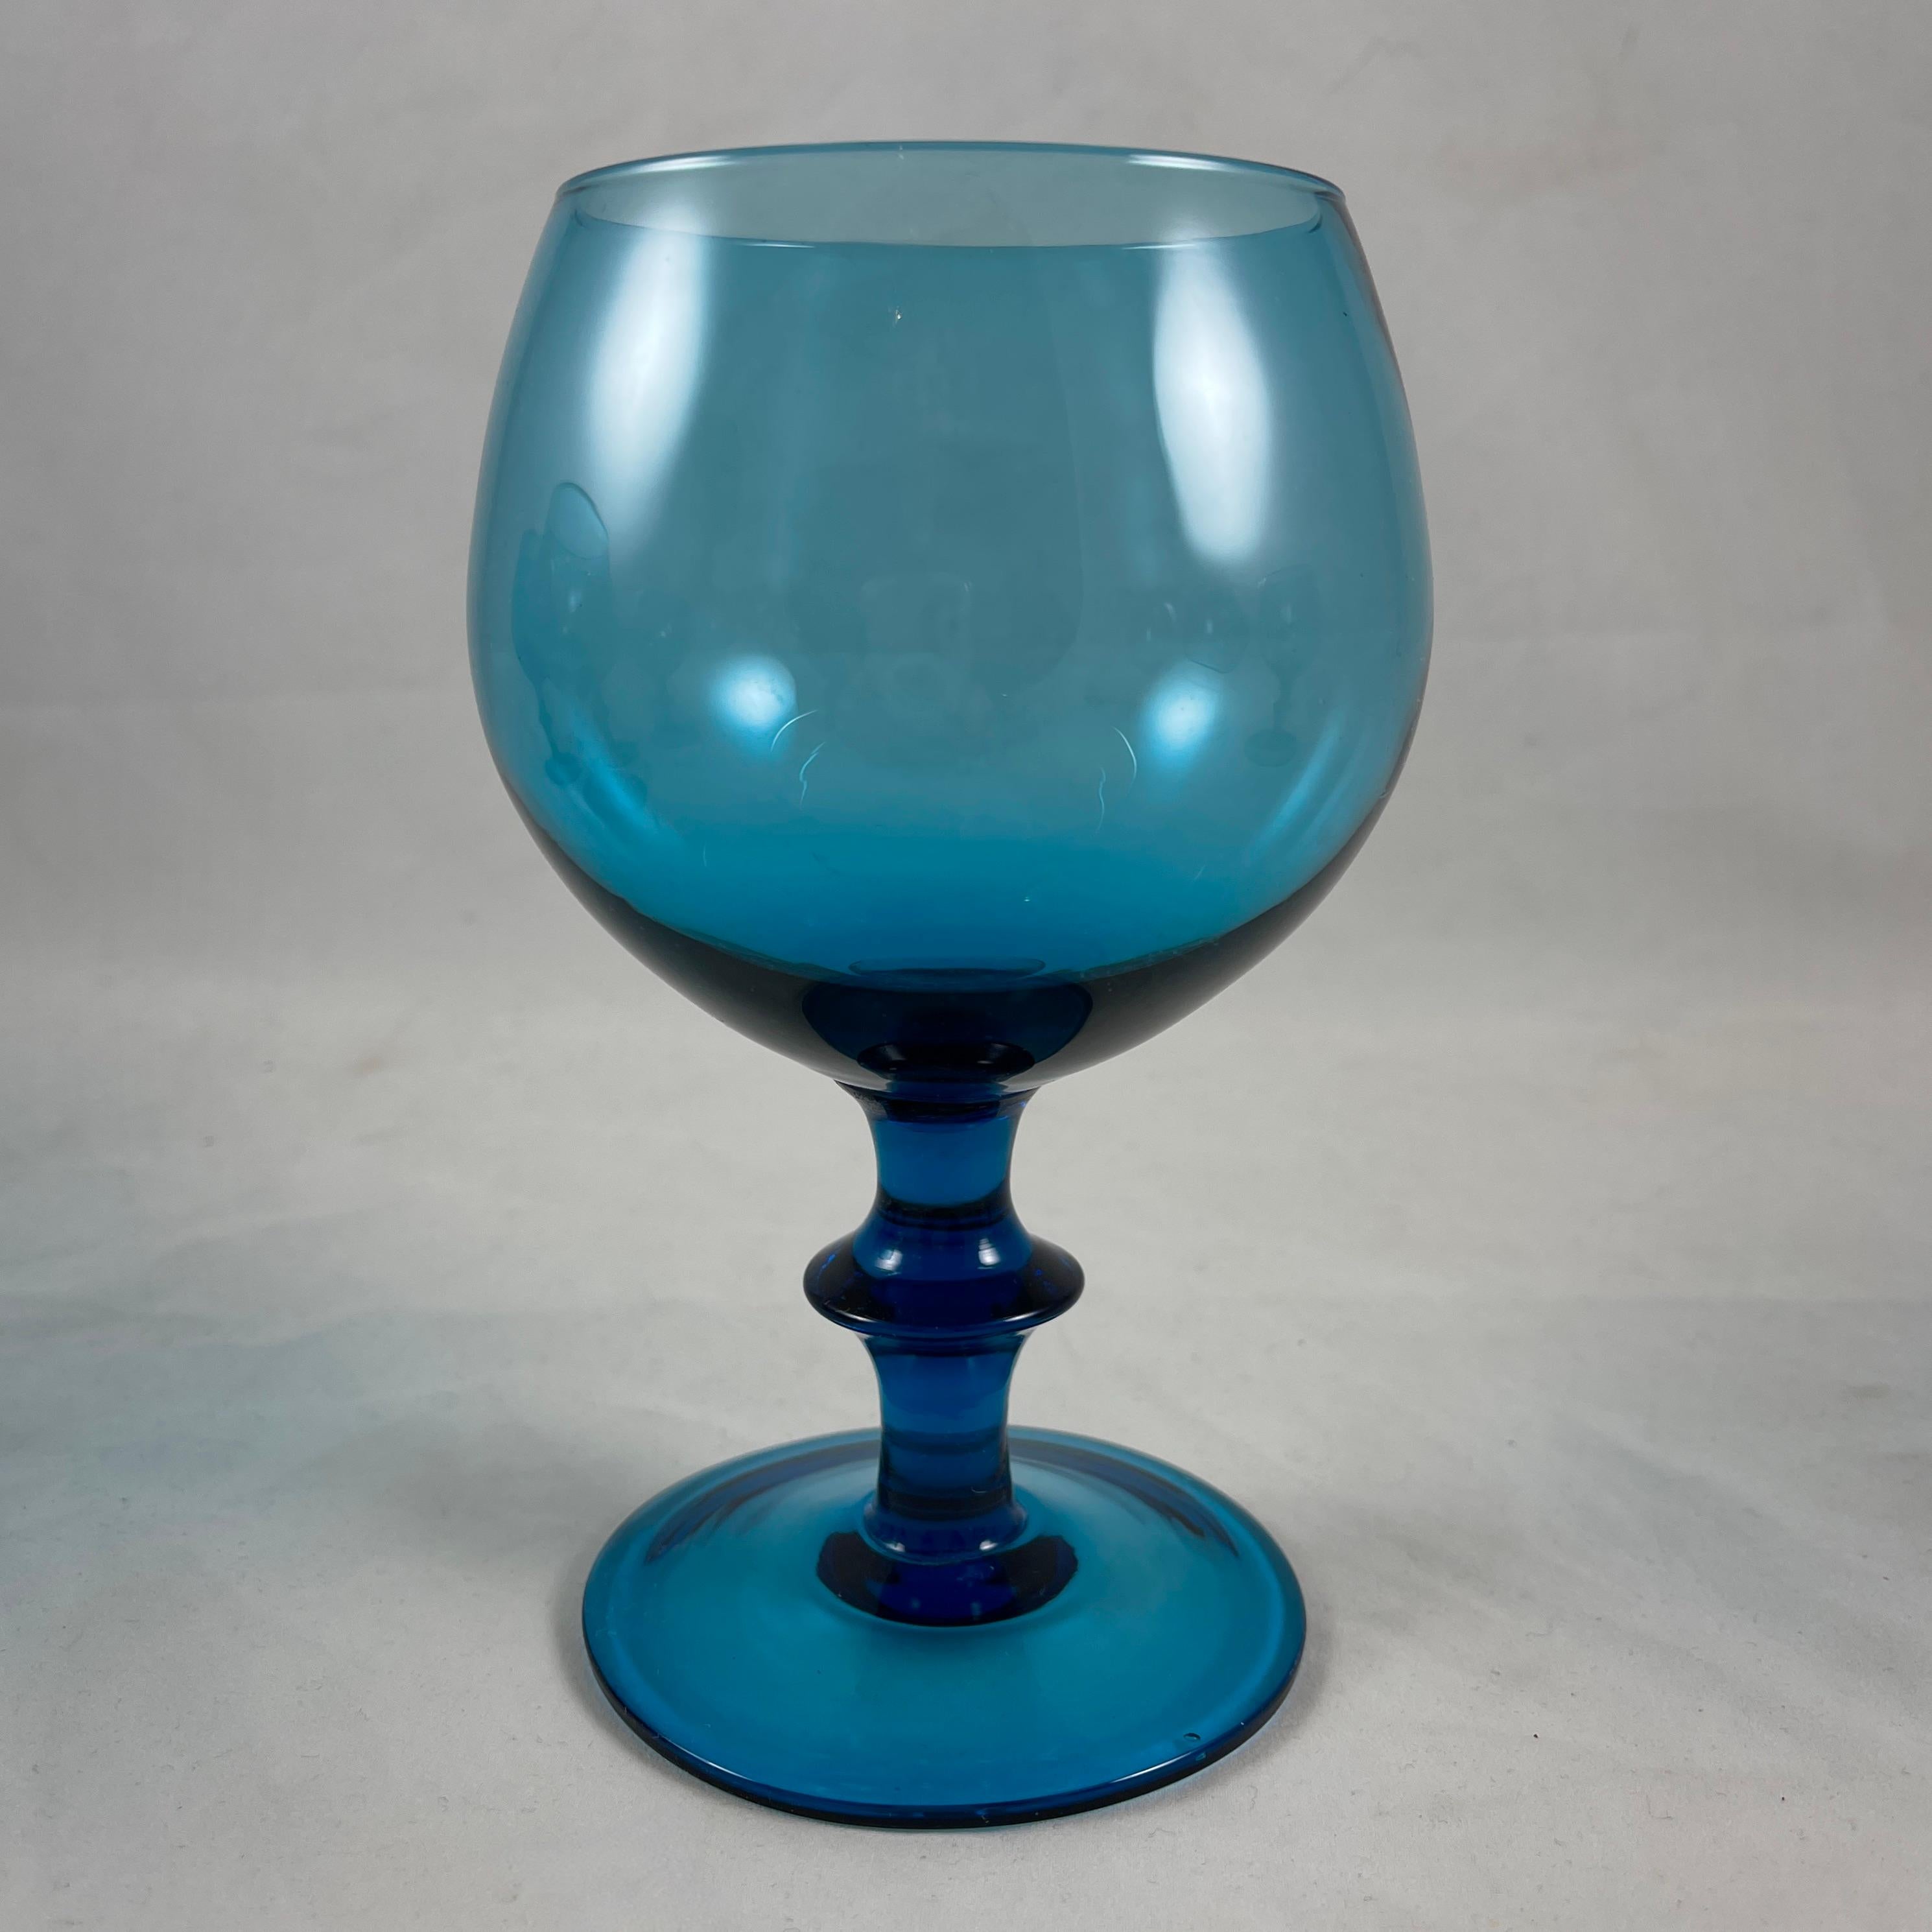 From the Empoli region of Northern Italy, a set of eight teal blue glass goblets, circa 1960-1970.

Hand blown, a balloon form upper on a tall footed shaped stem. A larger goblet of fine quality in a great saturated color.

Measures: 6 in. H x 4